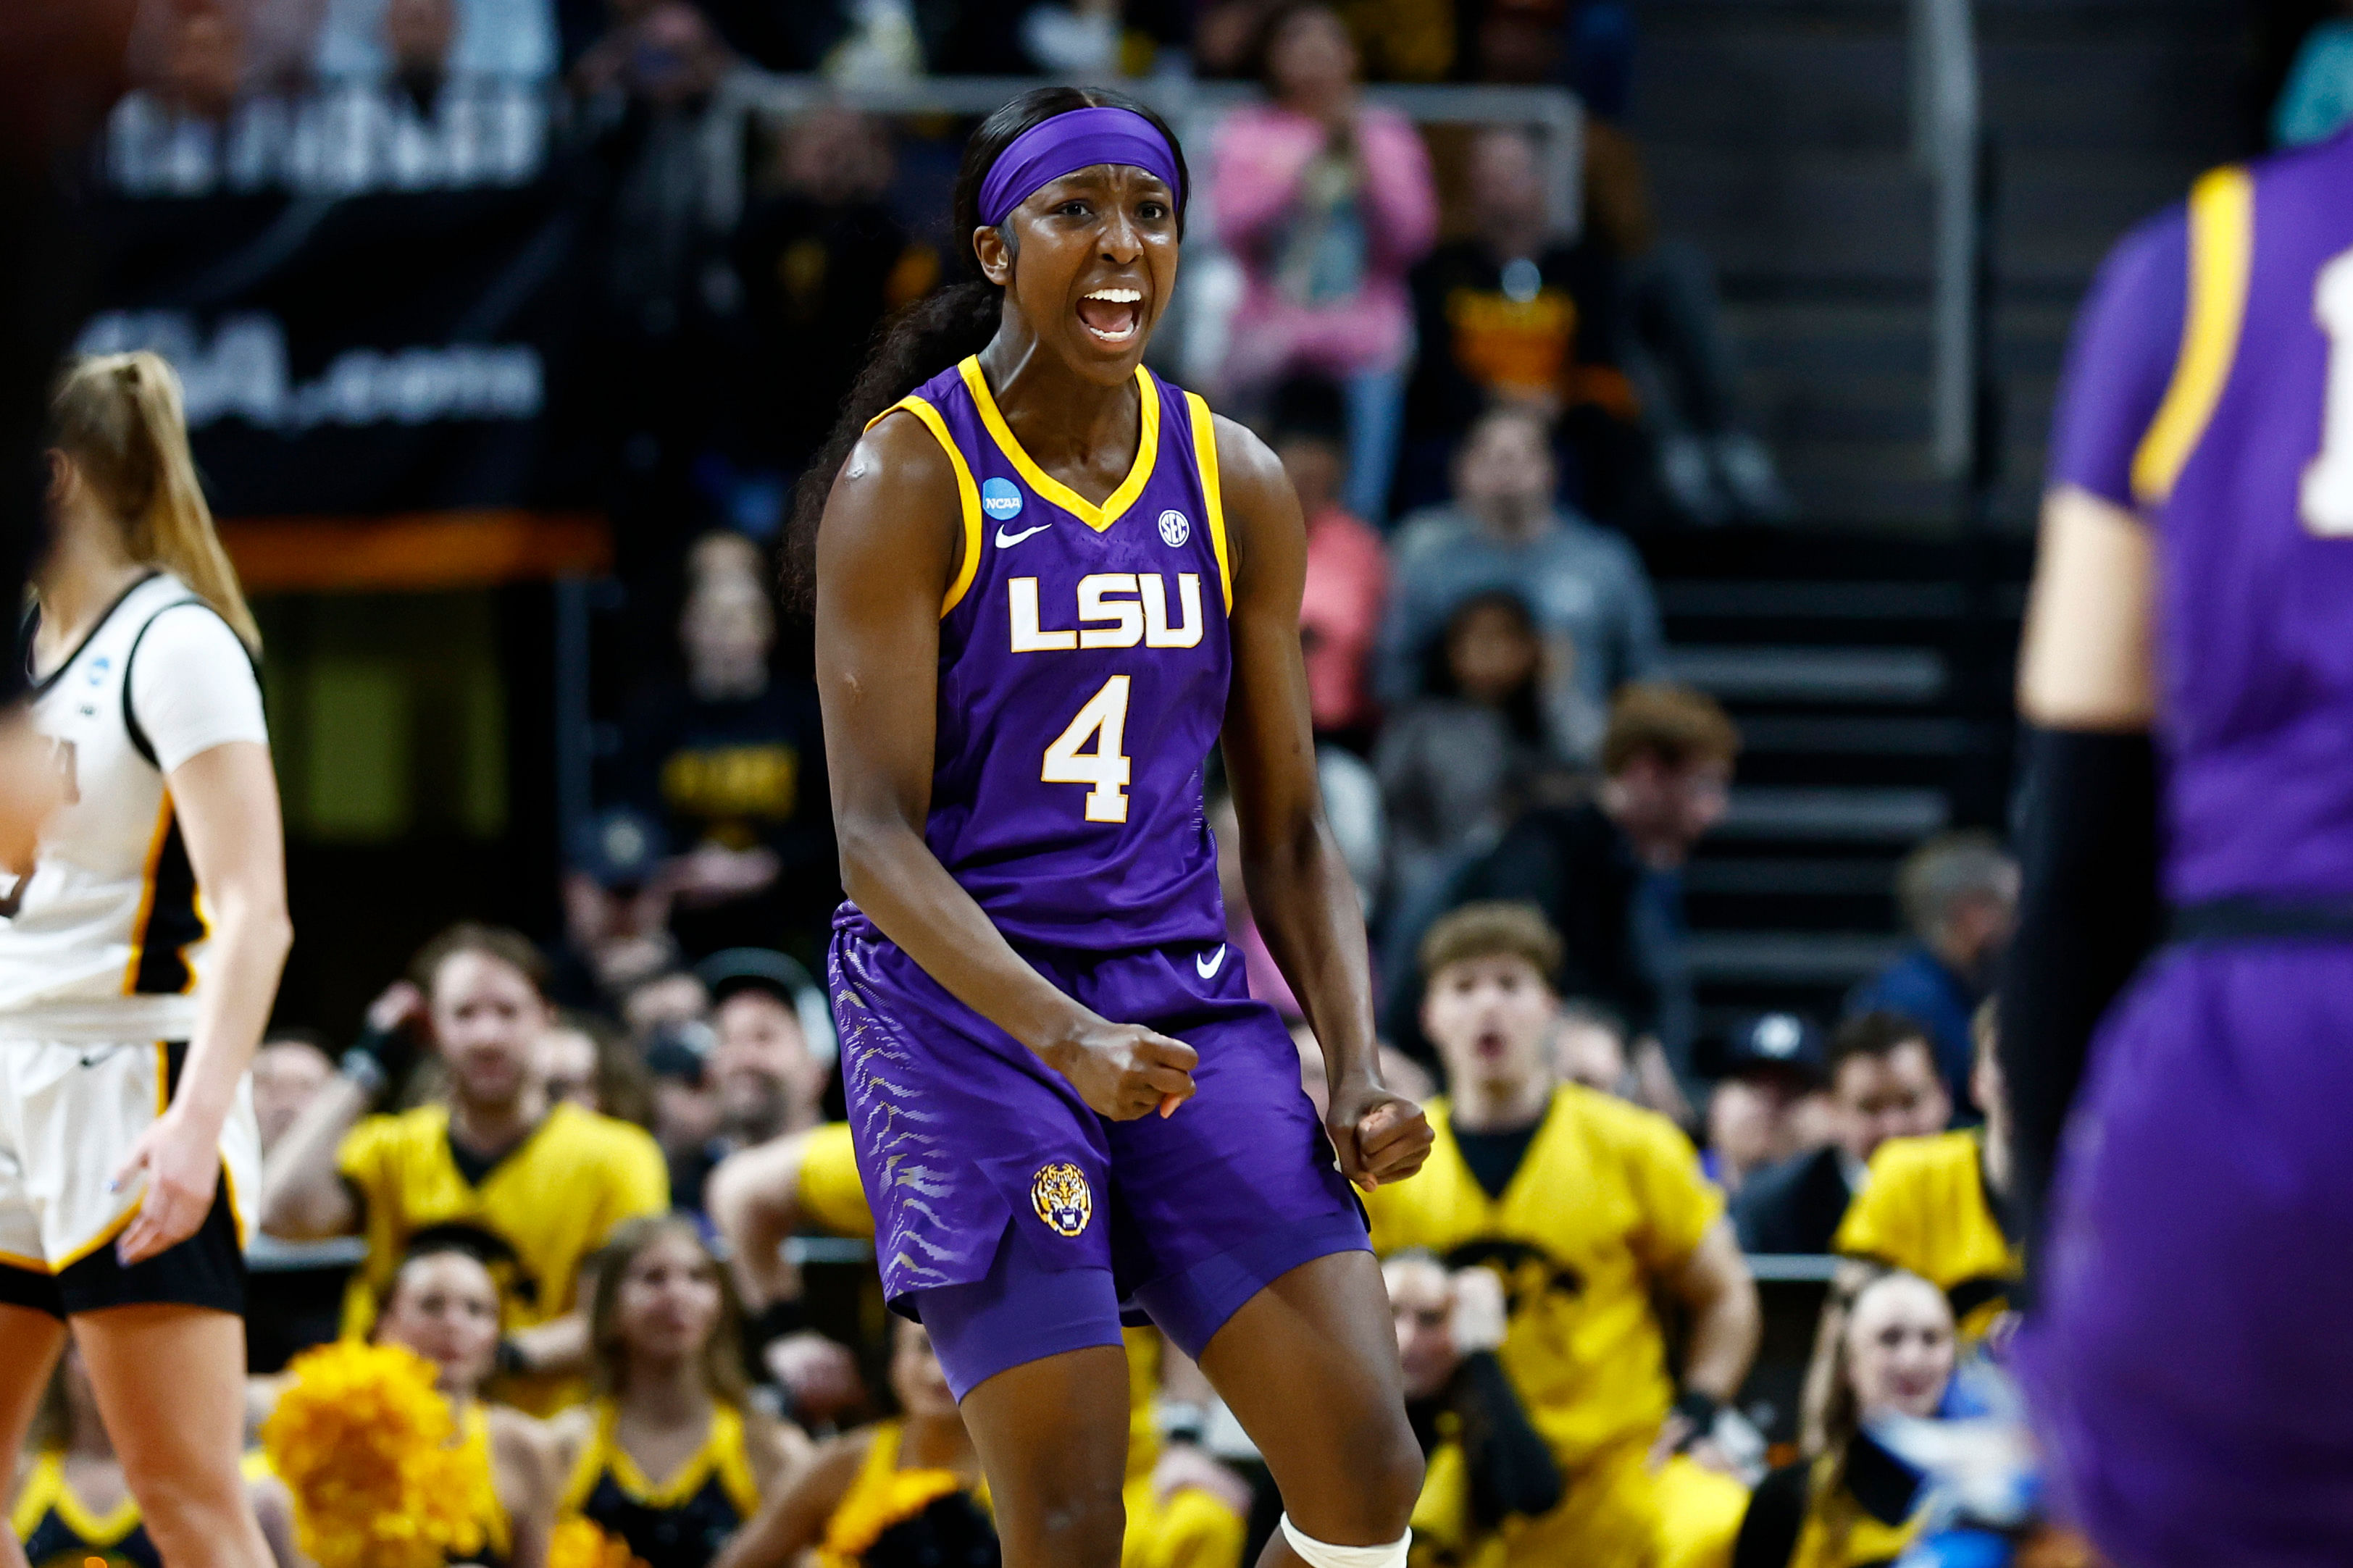 Flau&#039;jae Johnson averaged 14.9 ppg, 5.5 rpg, 2.5 apg, 2.1 spg and 1.0 bpg this past season for LSU as she became one of the primary contributors for the team. (Image Source: IMAGN)